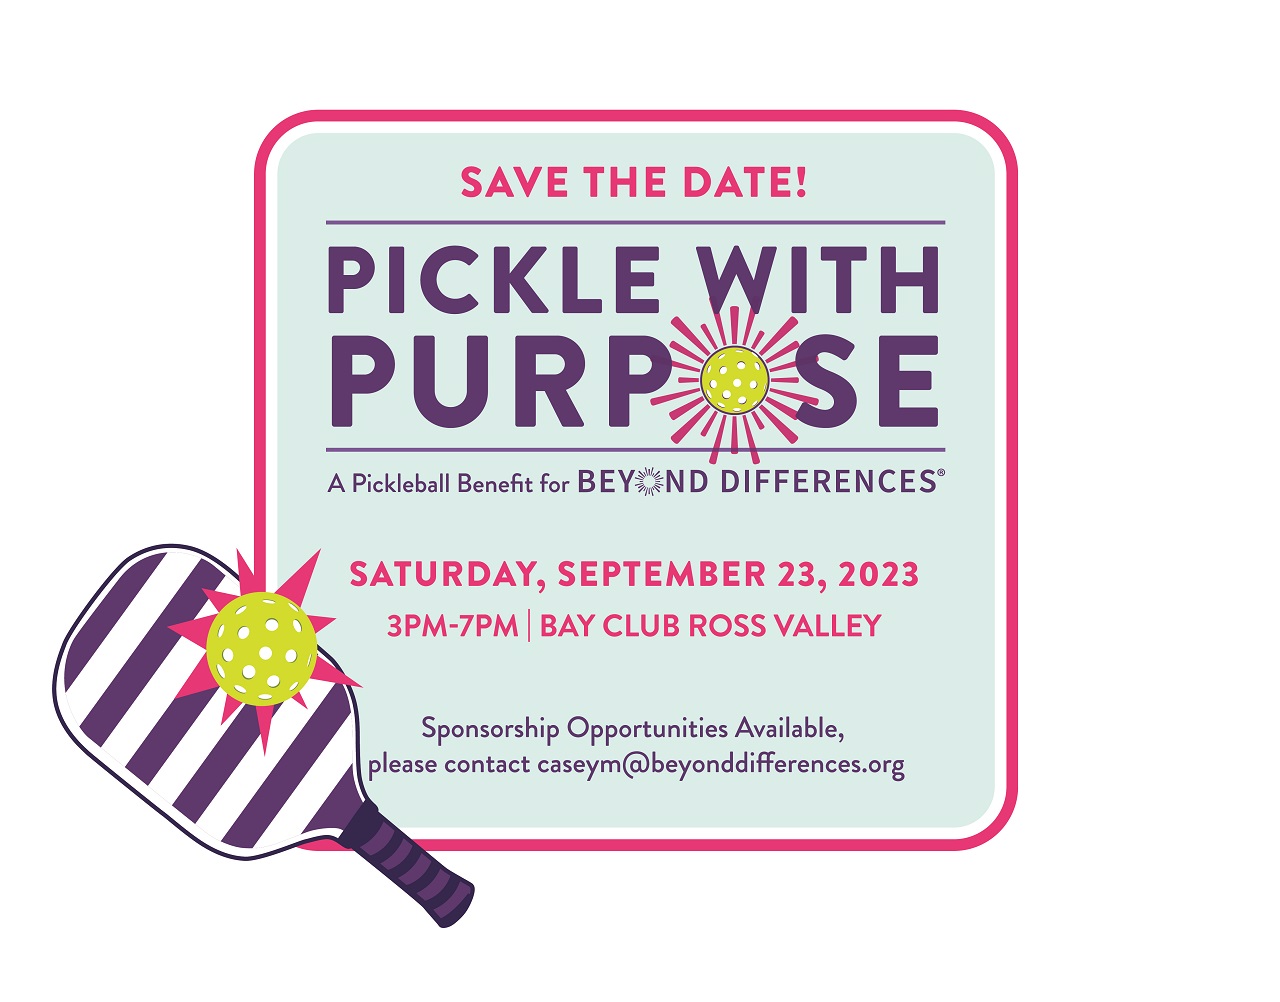 Save the Date invitation for Beyond Difference's Pickleball Benefit Septemeber 23, 2023